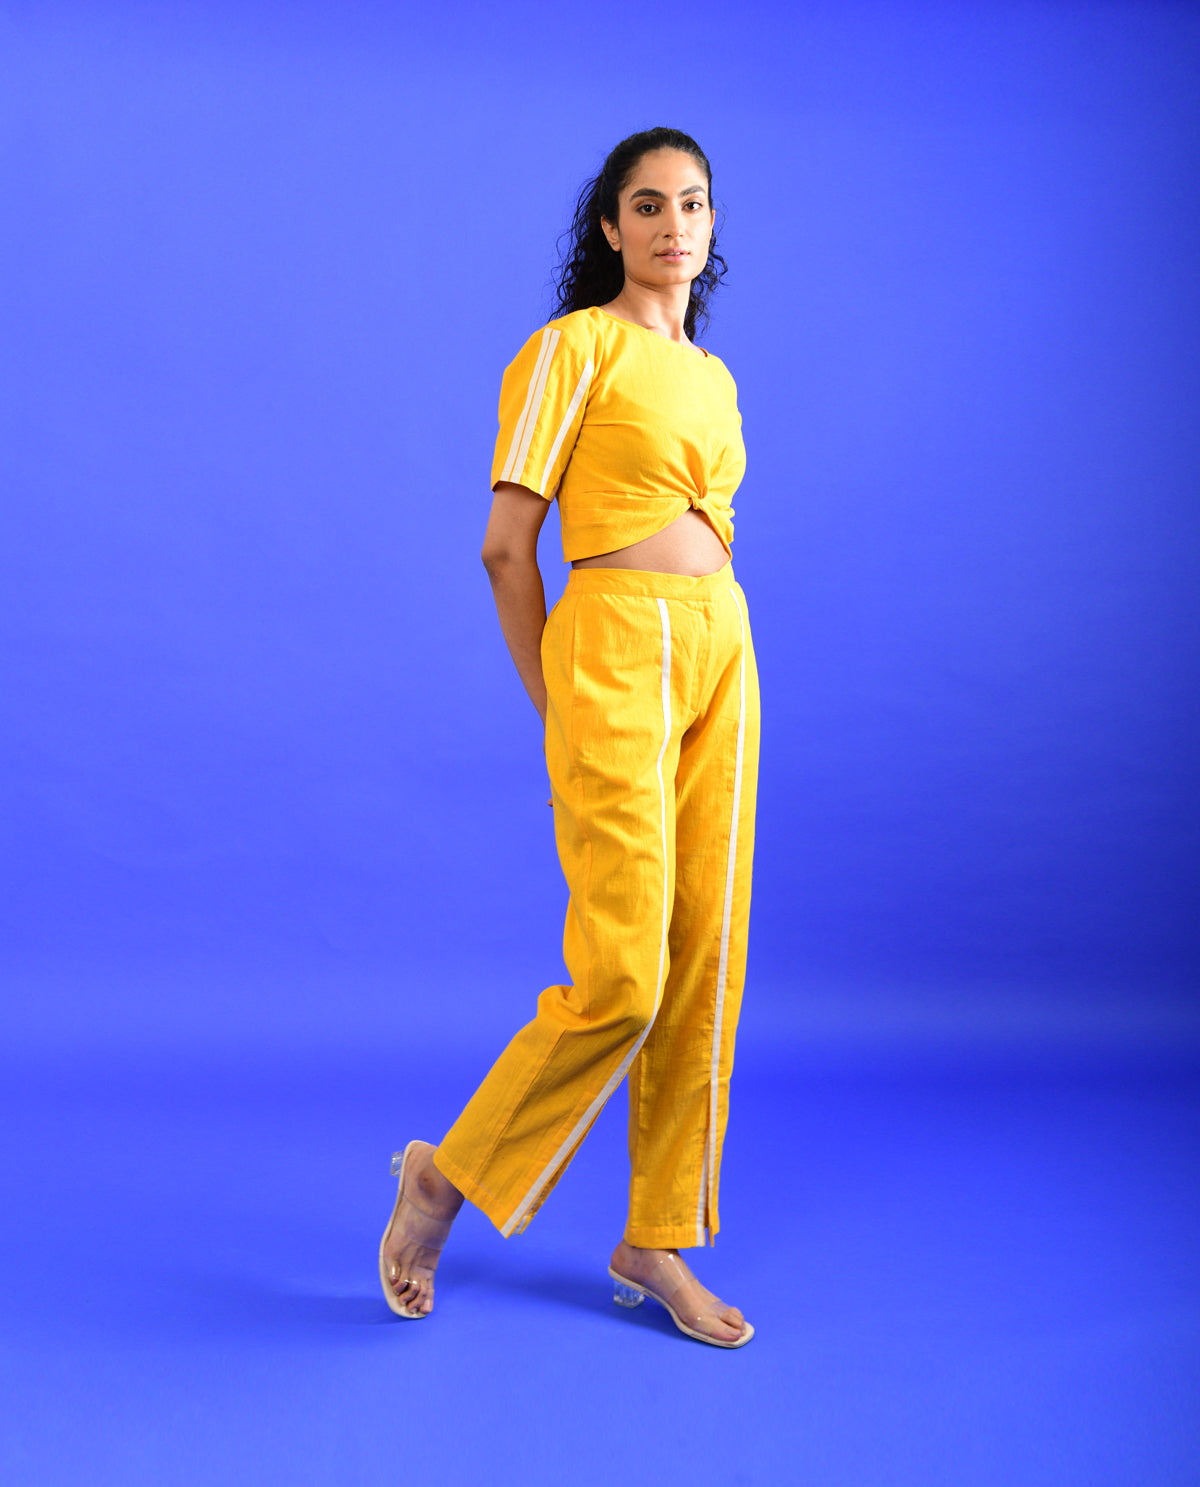 Yellow Solid Co-ord Set at Kamakhyaa by Rias Jaipur. This item is Casual Wear, Co-ord Sets, Handloom Cotton, Handspun, Handwoven, Hue, Regular Fit, Solids, Stripes, Travel, Travel Co-ords, Womenswear, Yellow